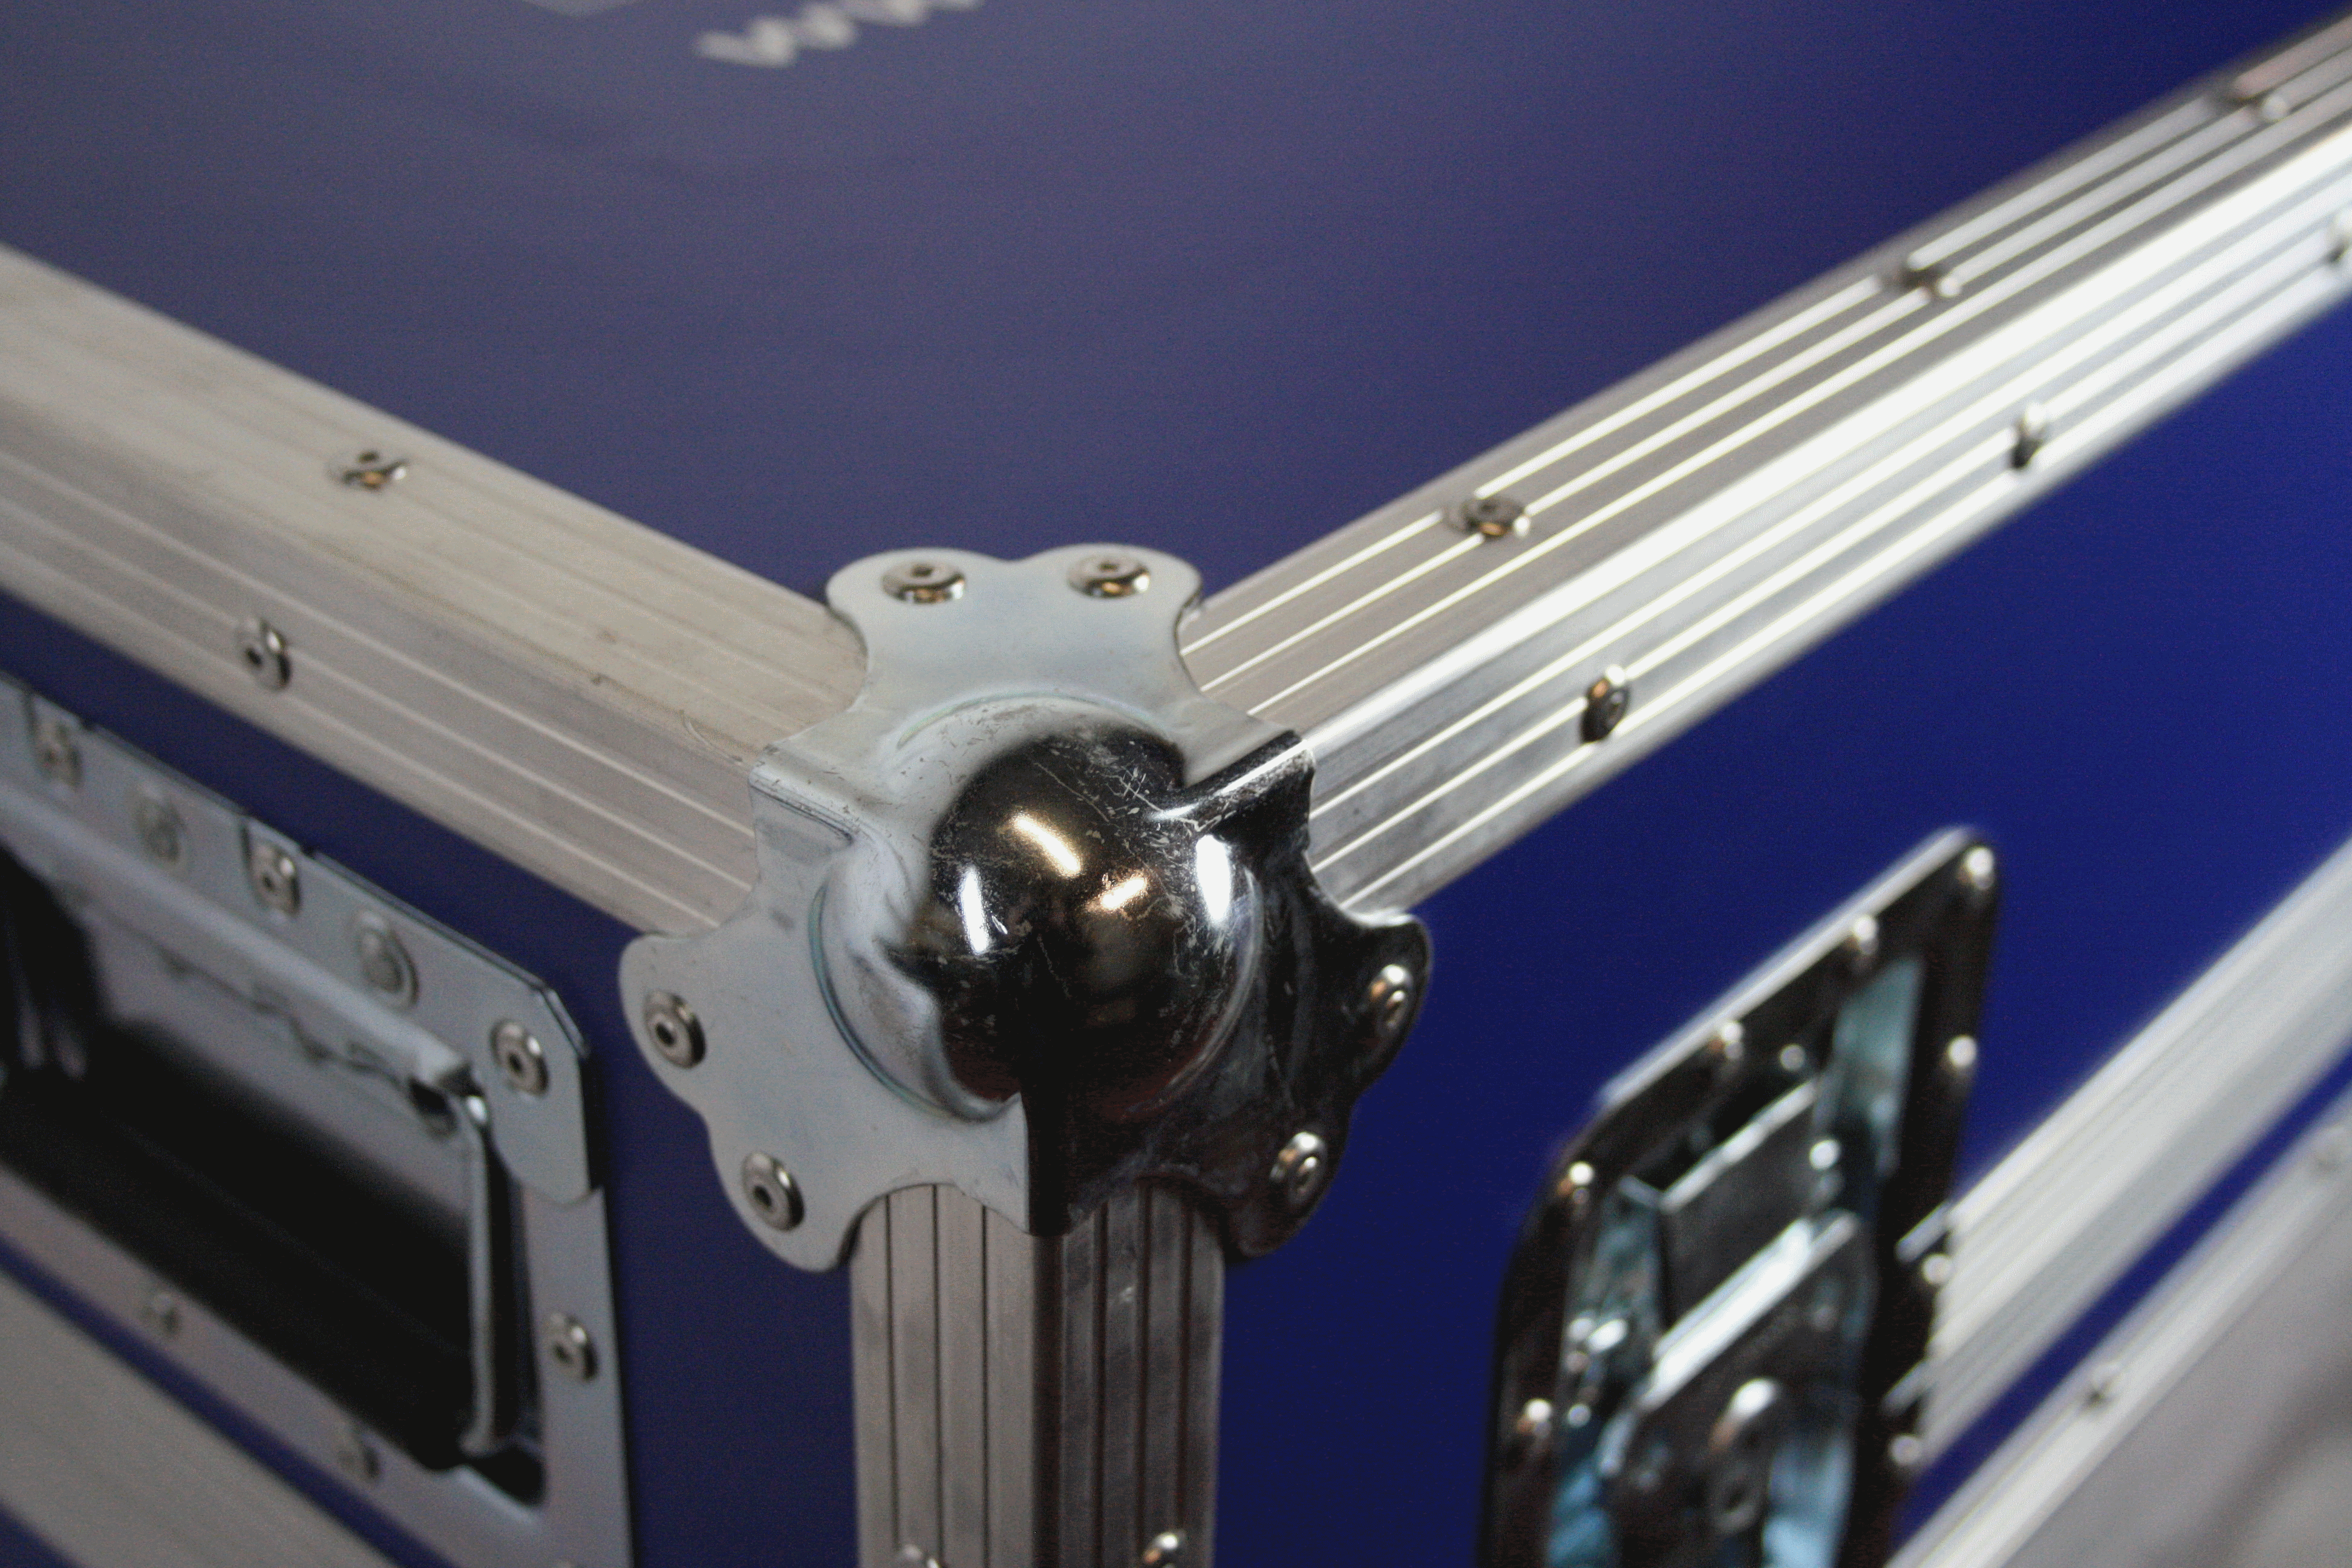 Flight Case for MagicQ MQ80 Blue with wheels.